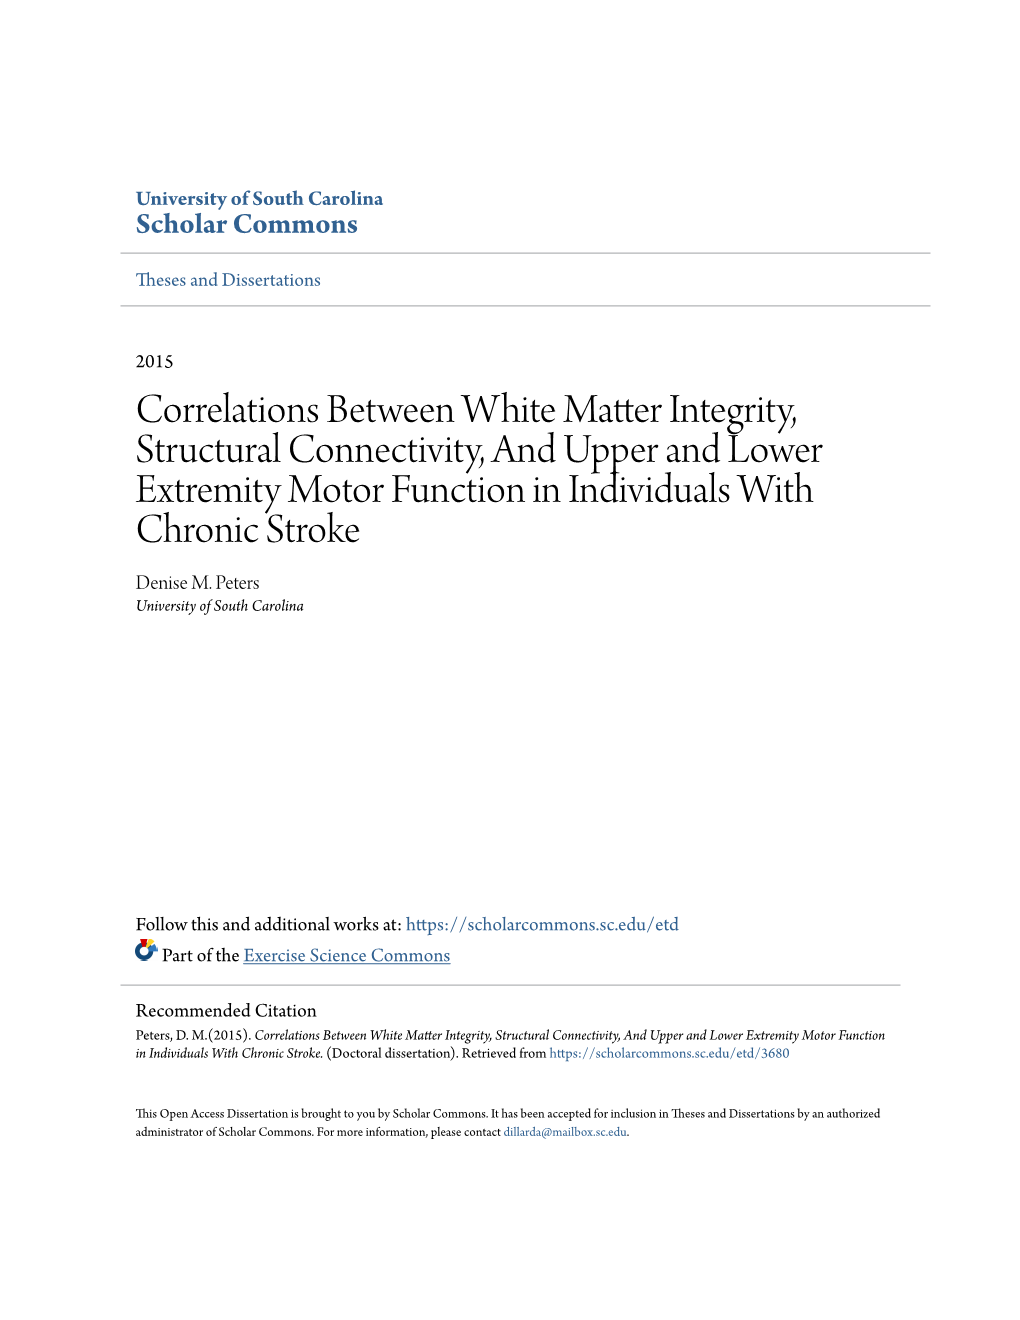 Correlations Between White Matter Integrity, Structural Connectivity, and Upper and Lower Extremity Motor Function in Individuals with Chronic Stroke Denise M